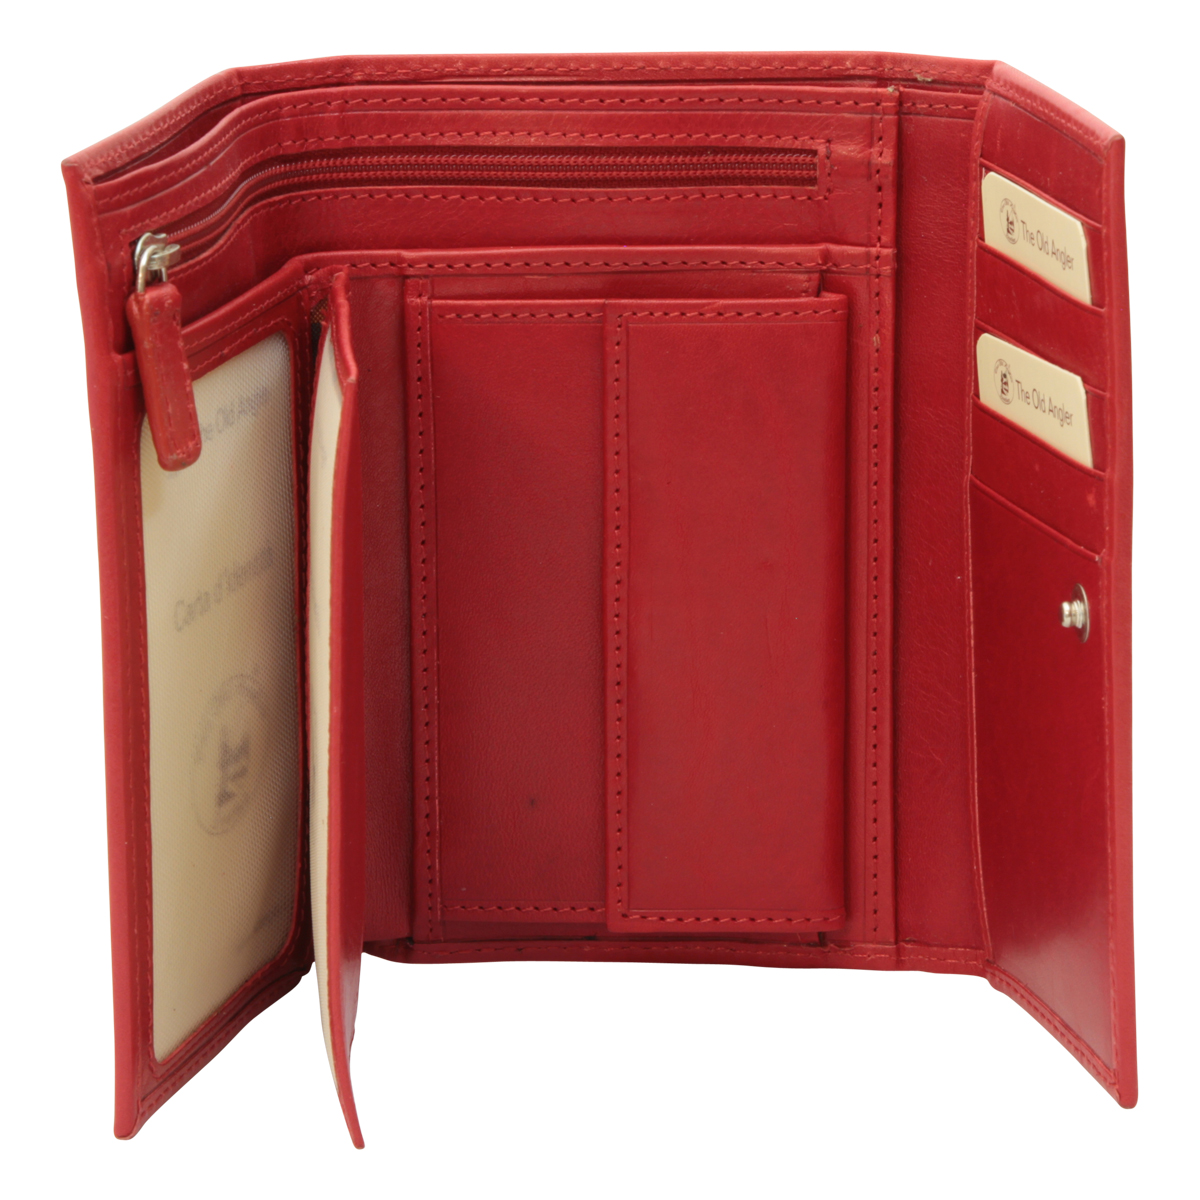 Leather wallet for women - red | 501789RO US | Old Angler Firenze